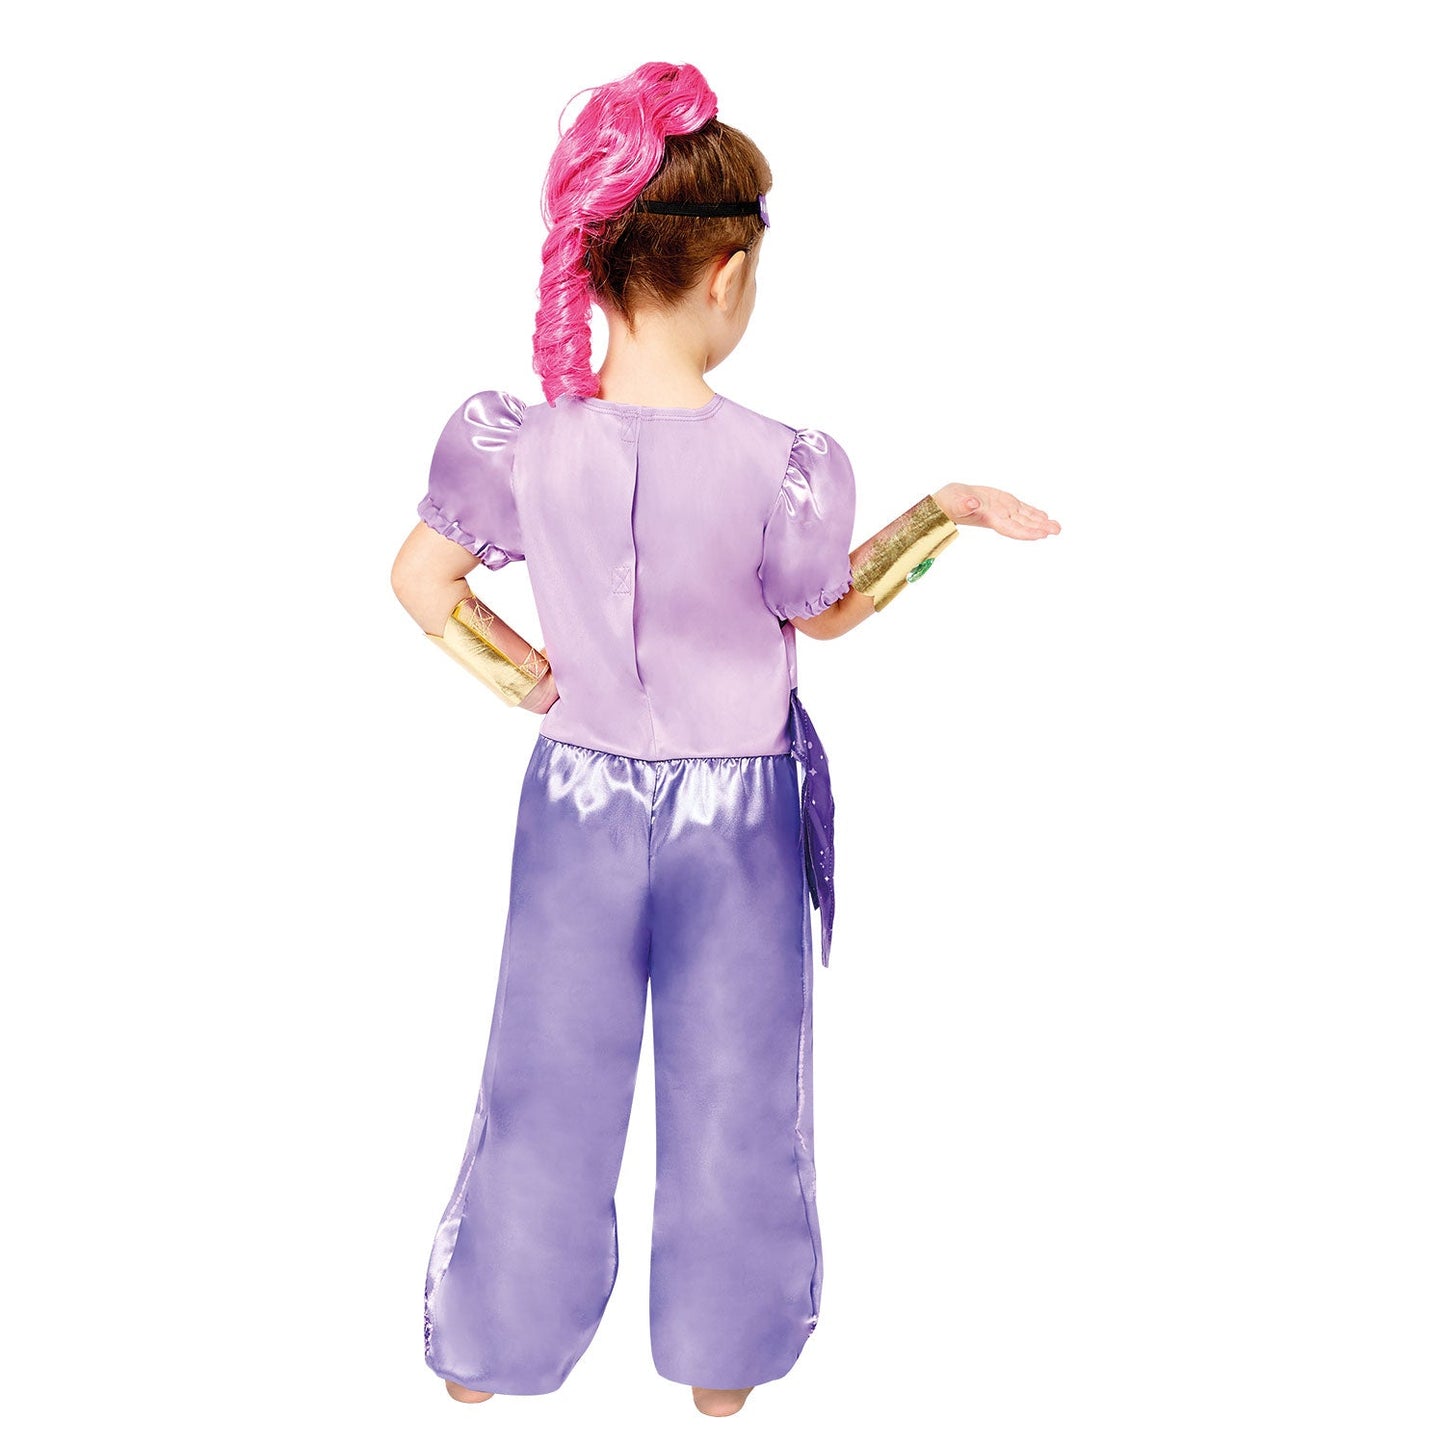 Girls Shimmer Costume includes printed satin jumpsuit, headband, wrist cuffs and hair piece